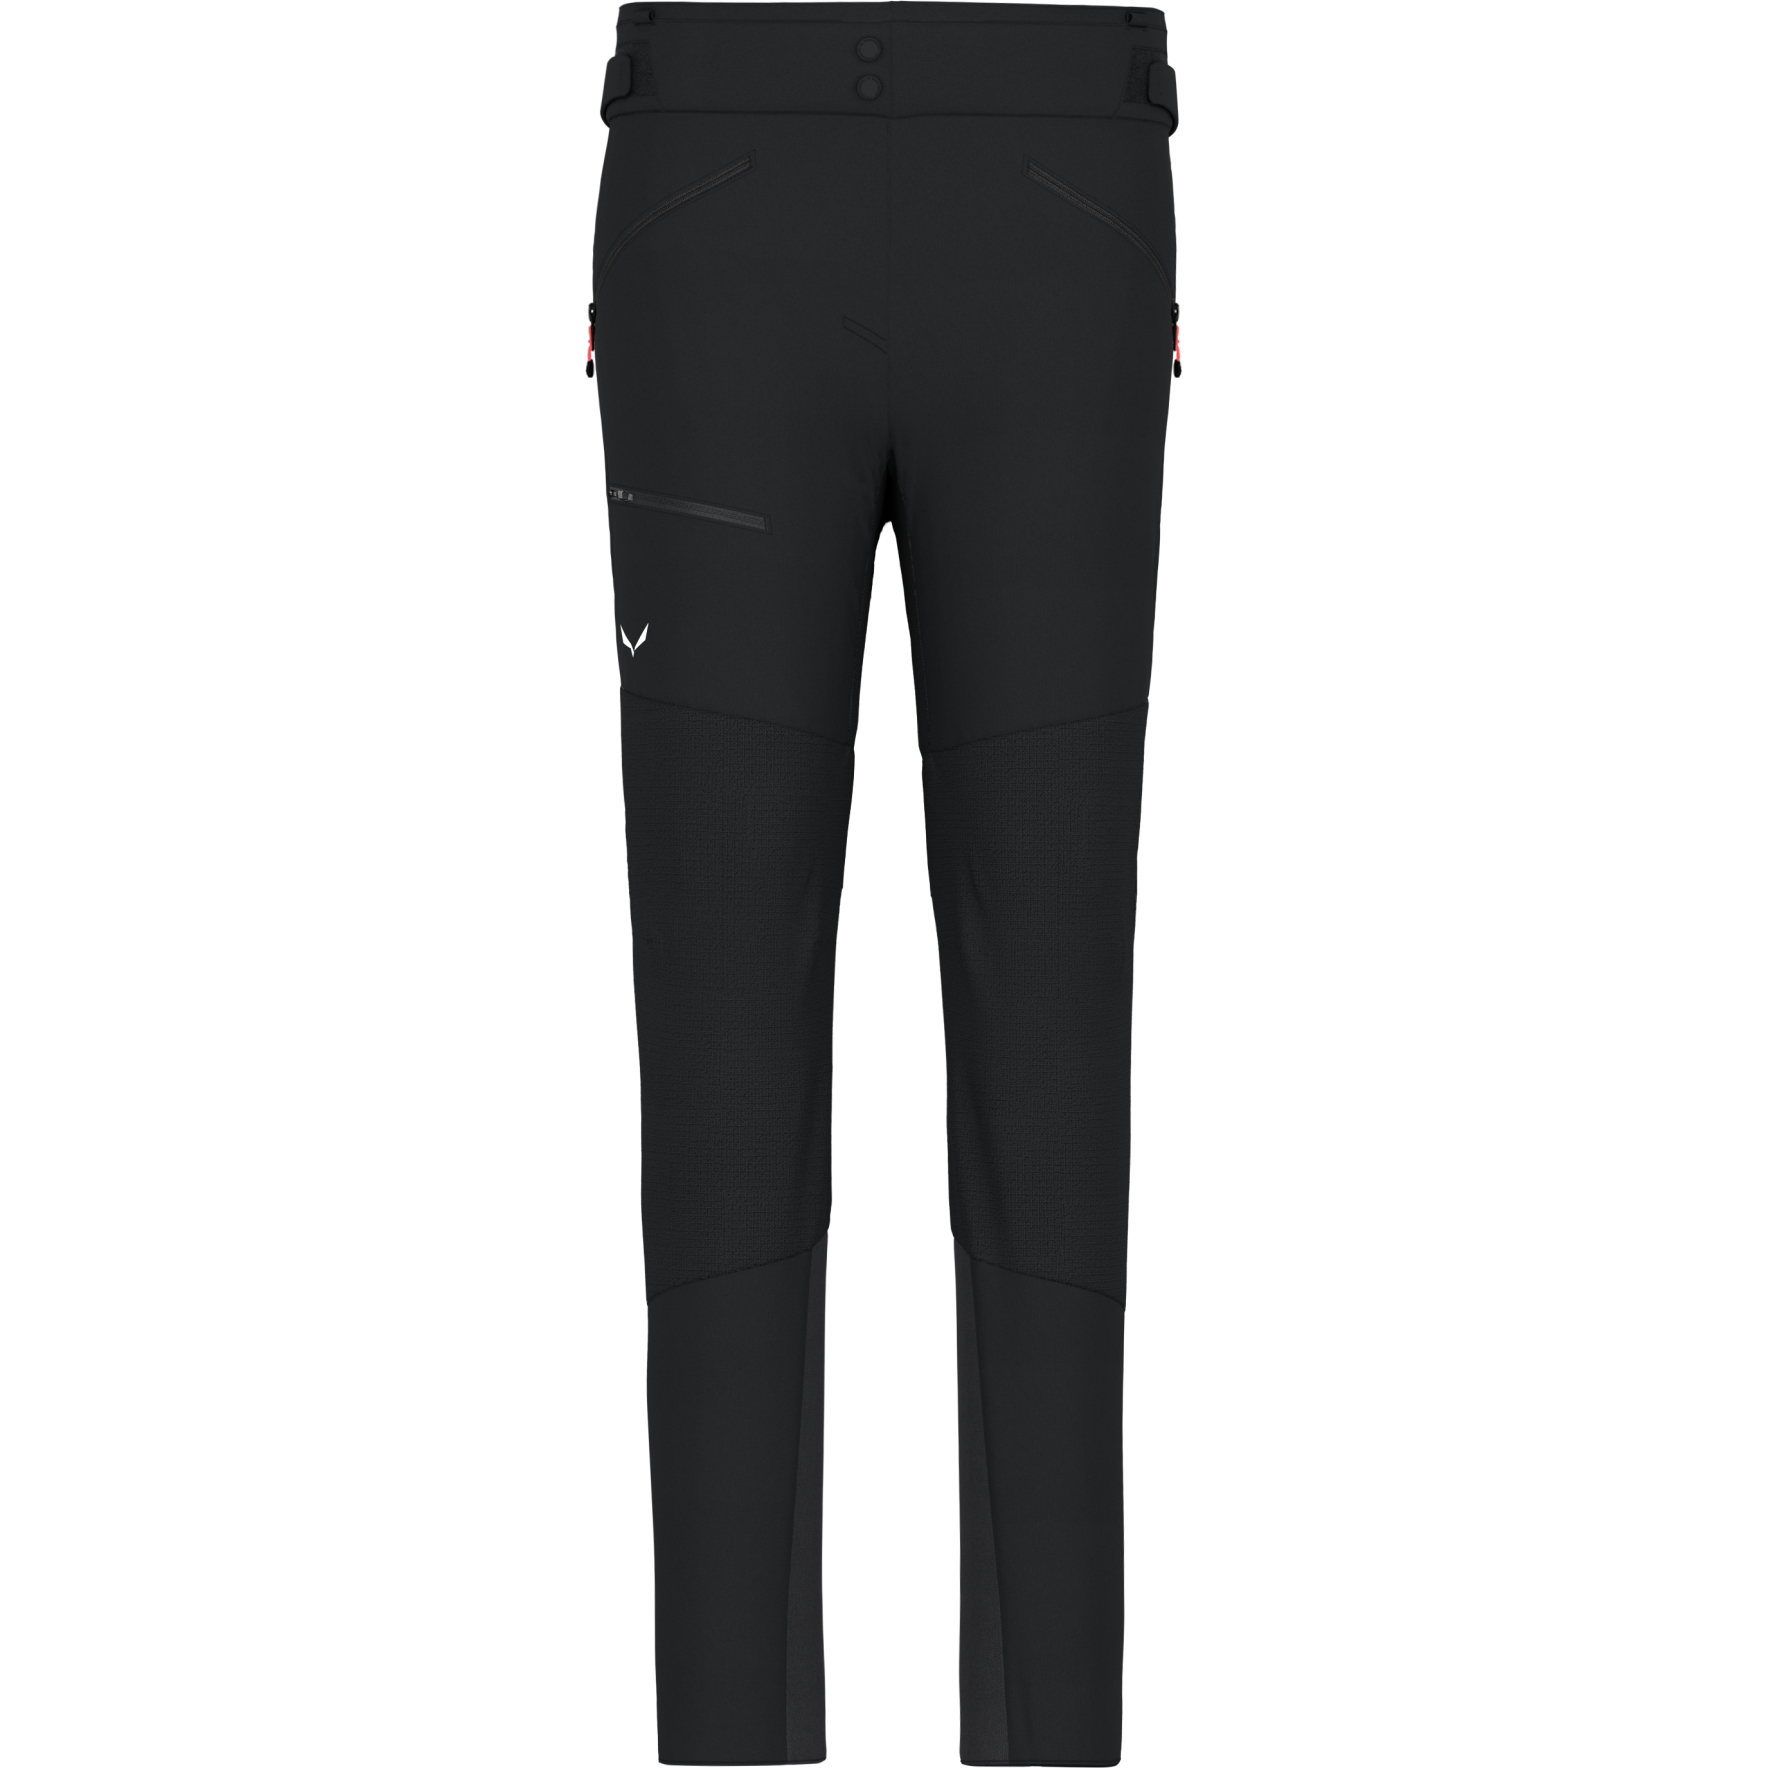 Picture of Salewa Ortles Durastretch Pants Women - black out 910